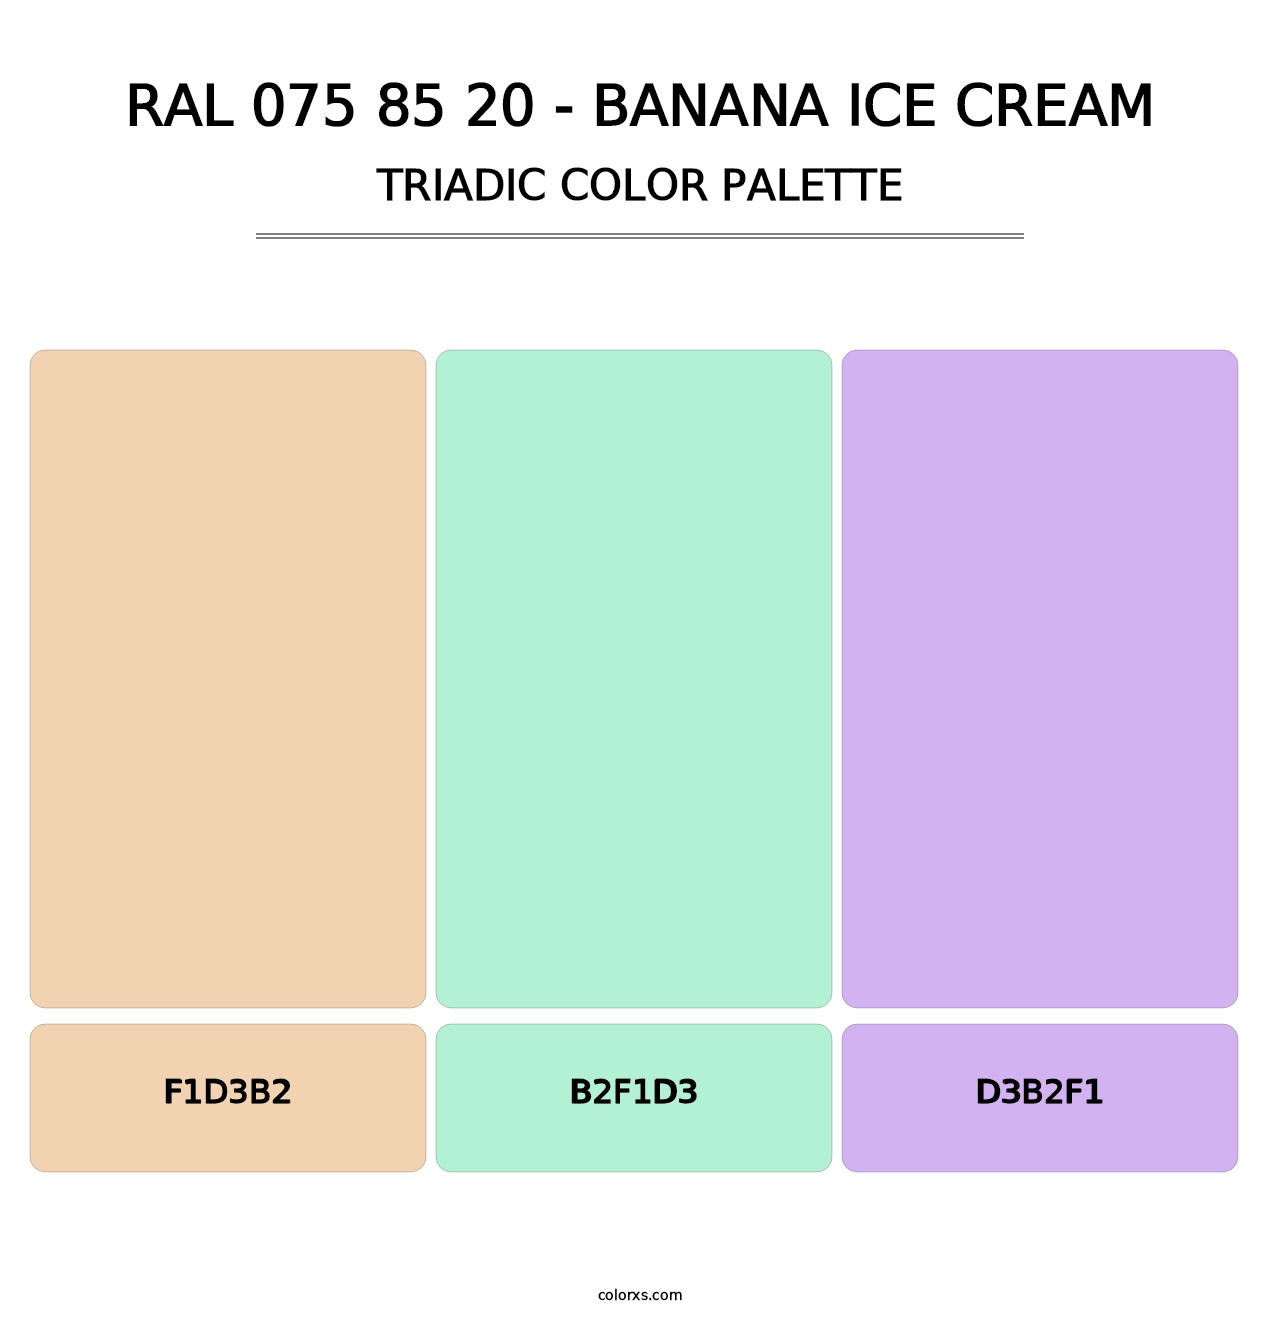 RAL 075 85 20 - Banana Ice Cream - Triadic Color Palette